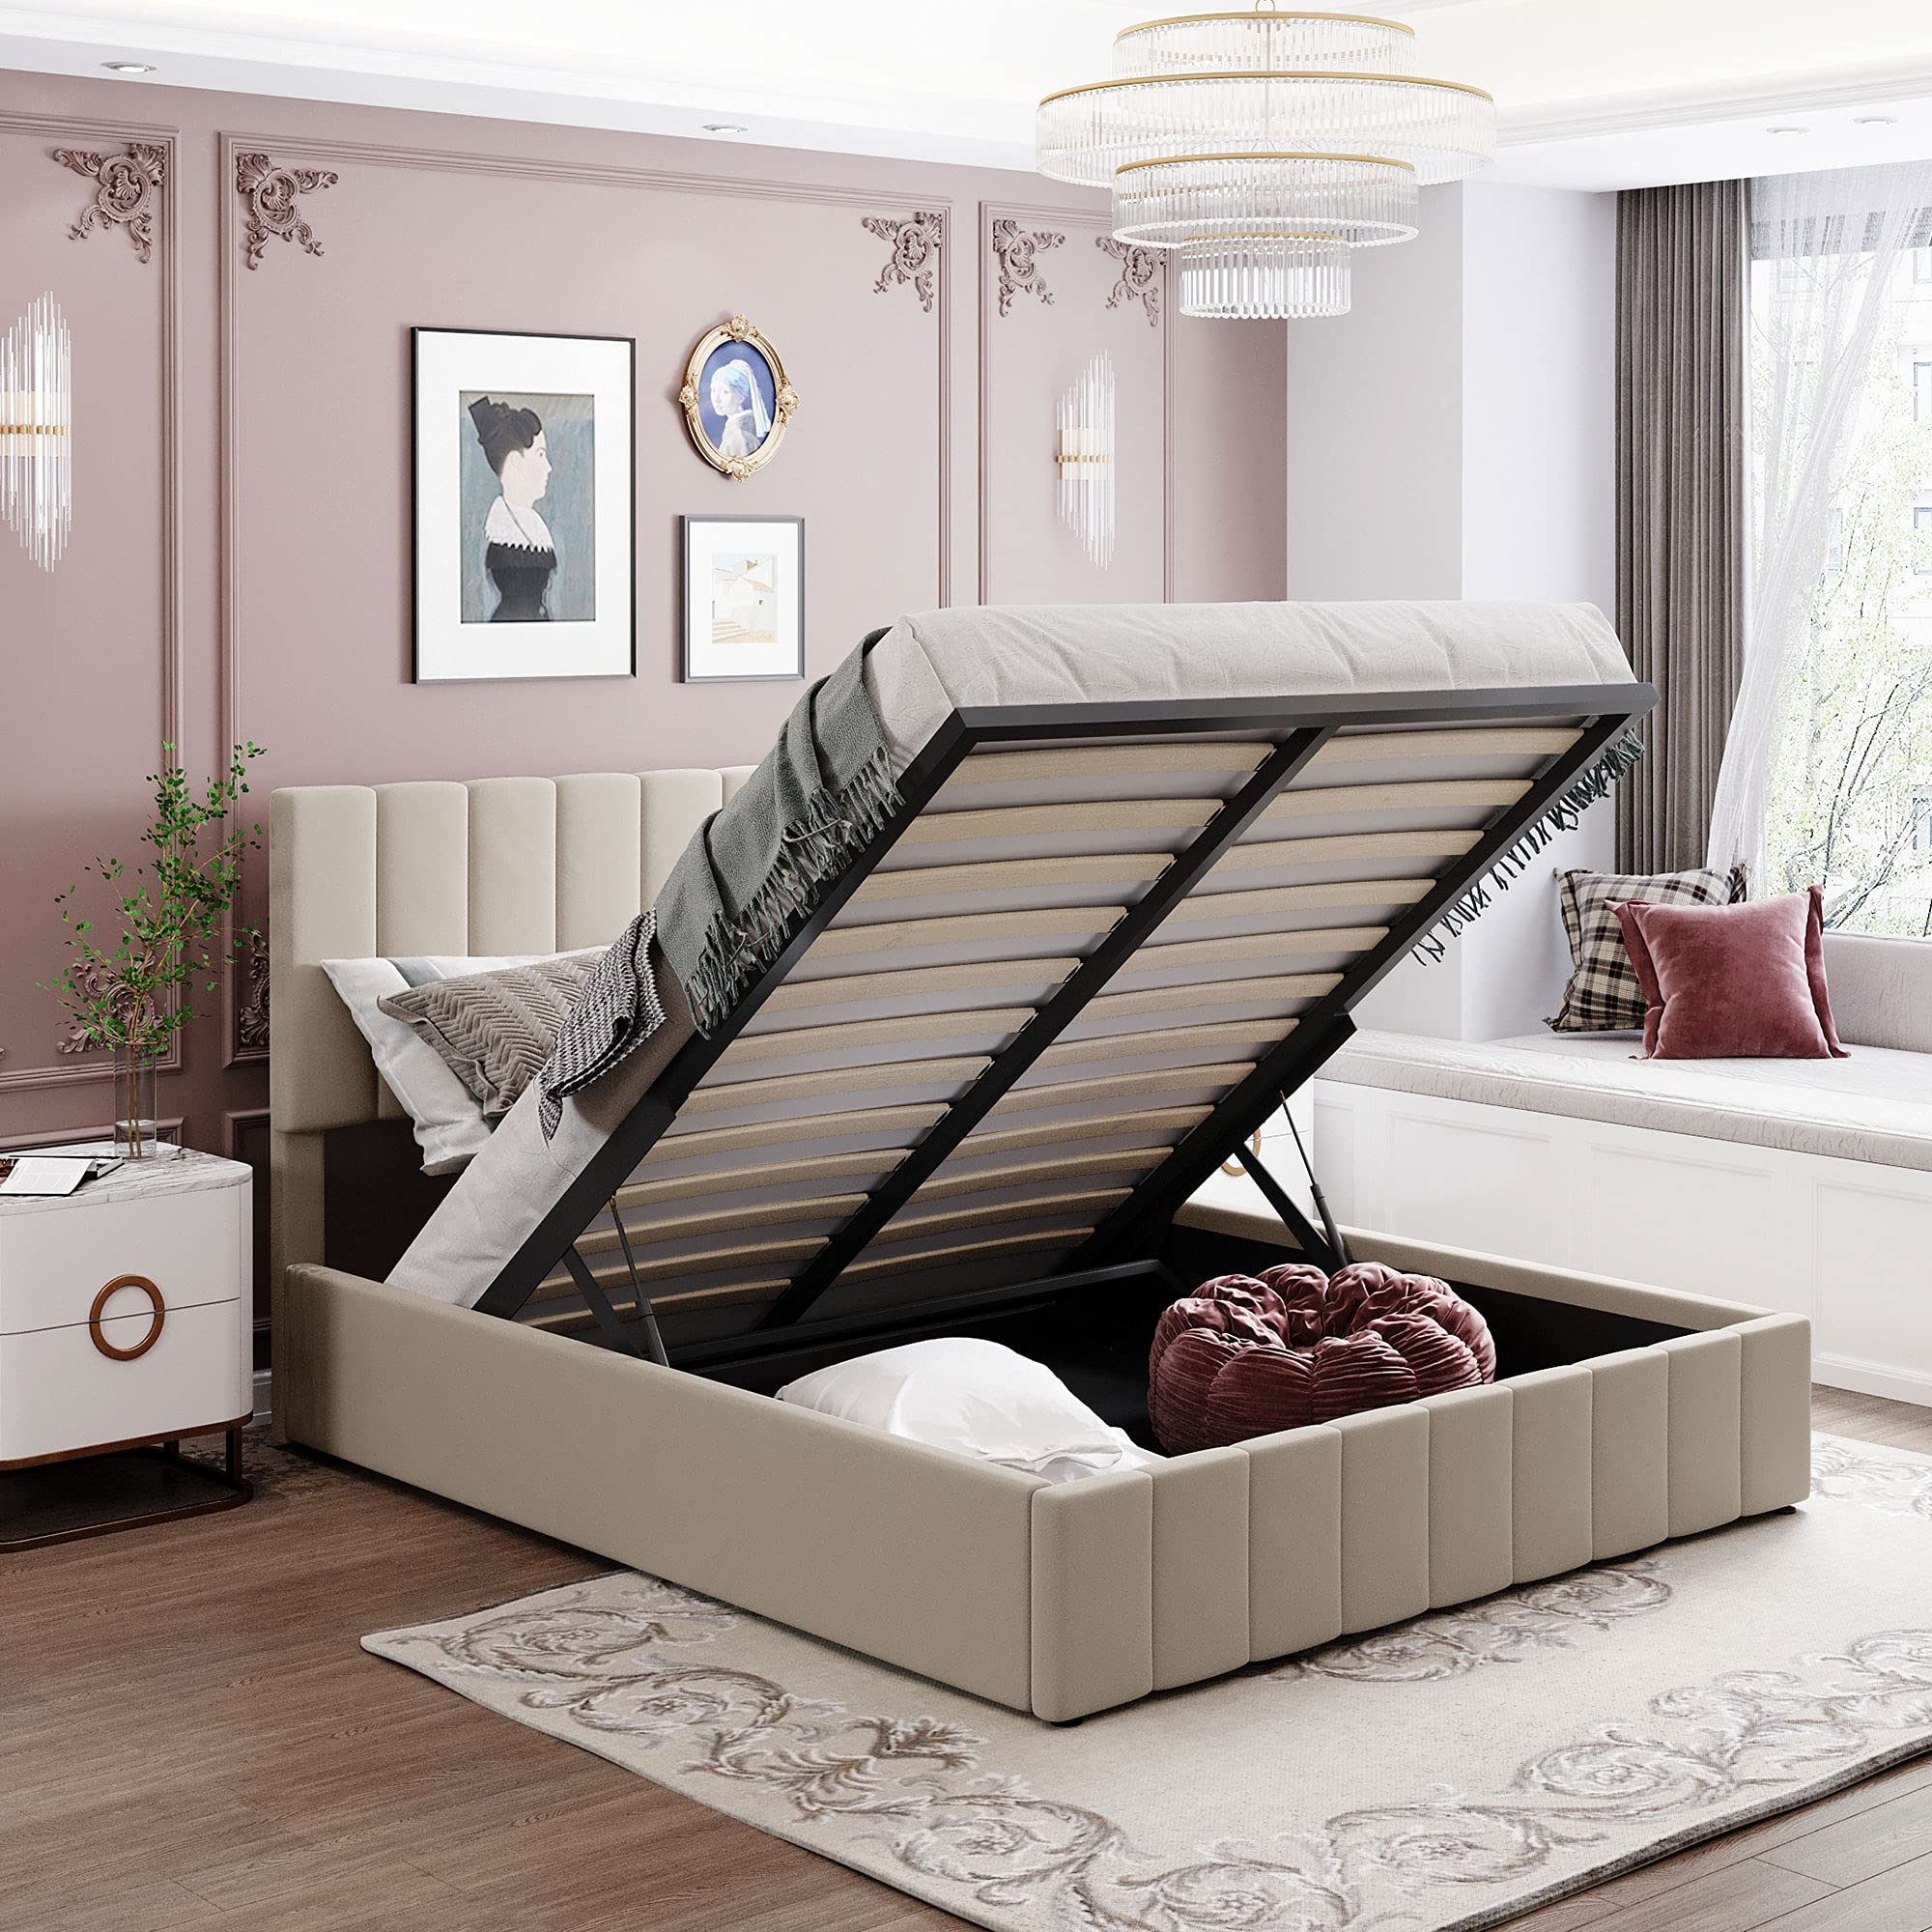 TRIPLE TREE Upholstered Platform Bed with Storage Underneath, Queen Size Wood Platform Bed Frame with Headboard and a Hydraulic 